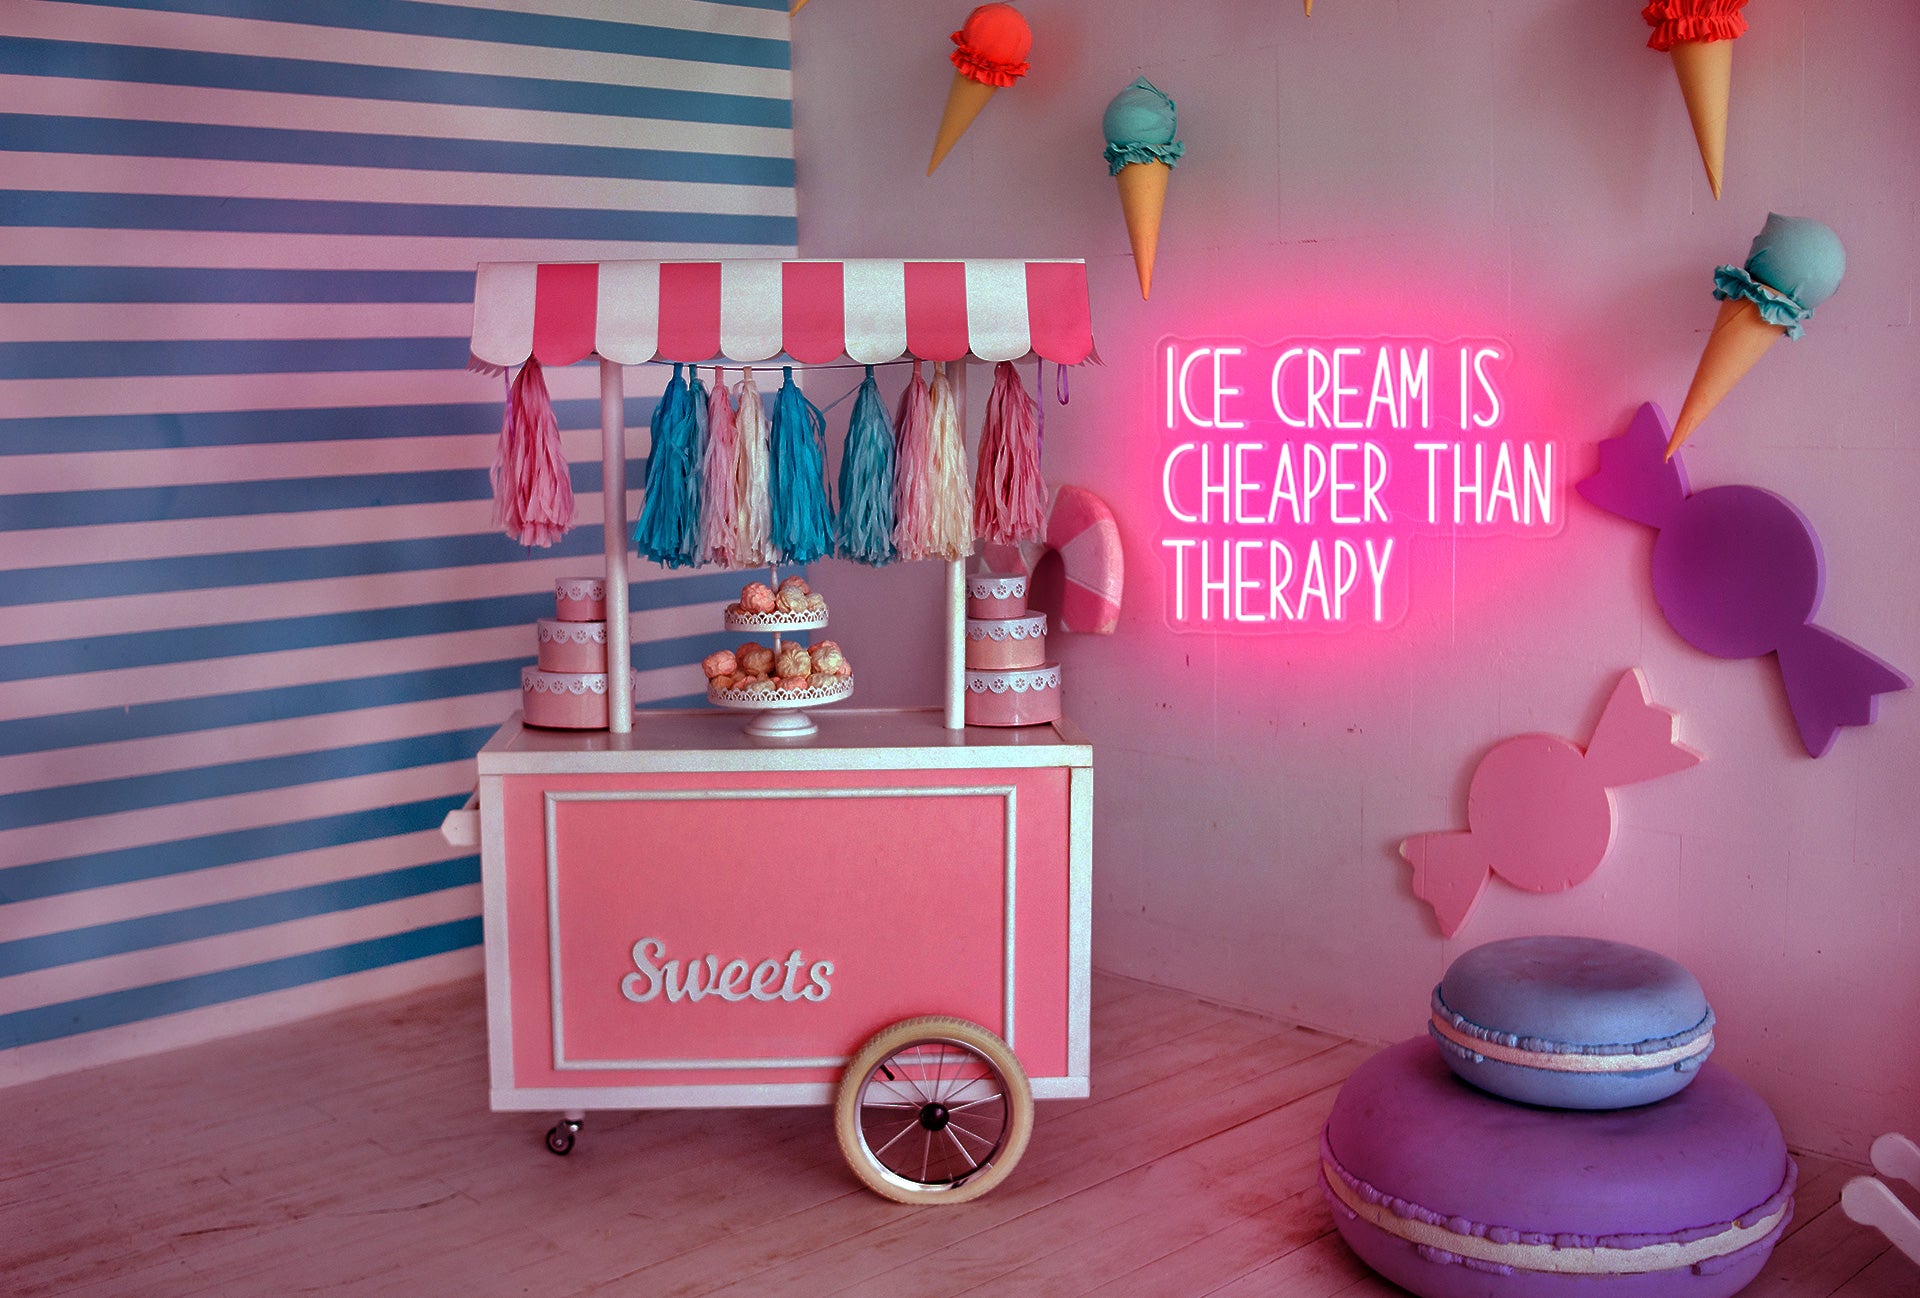 Ice cream is cheaper than therapy Neon light